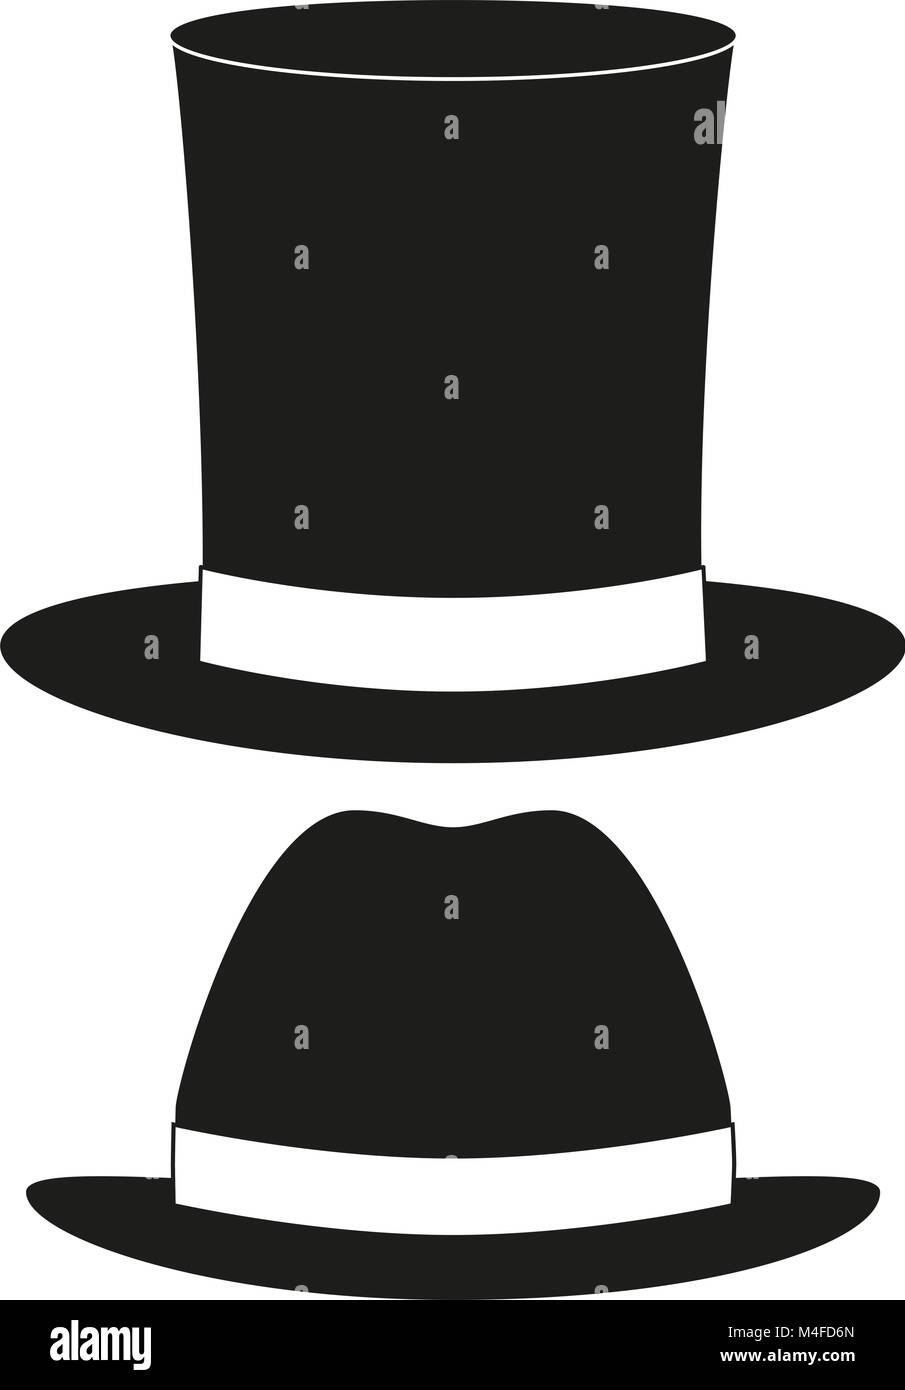 Tophat Man High Resolution Stock Photography And Images Alamy